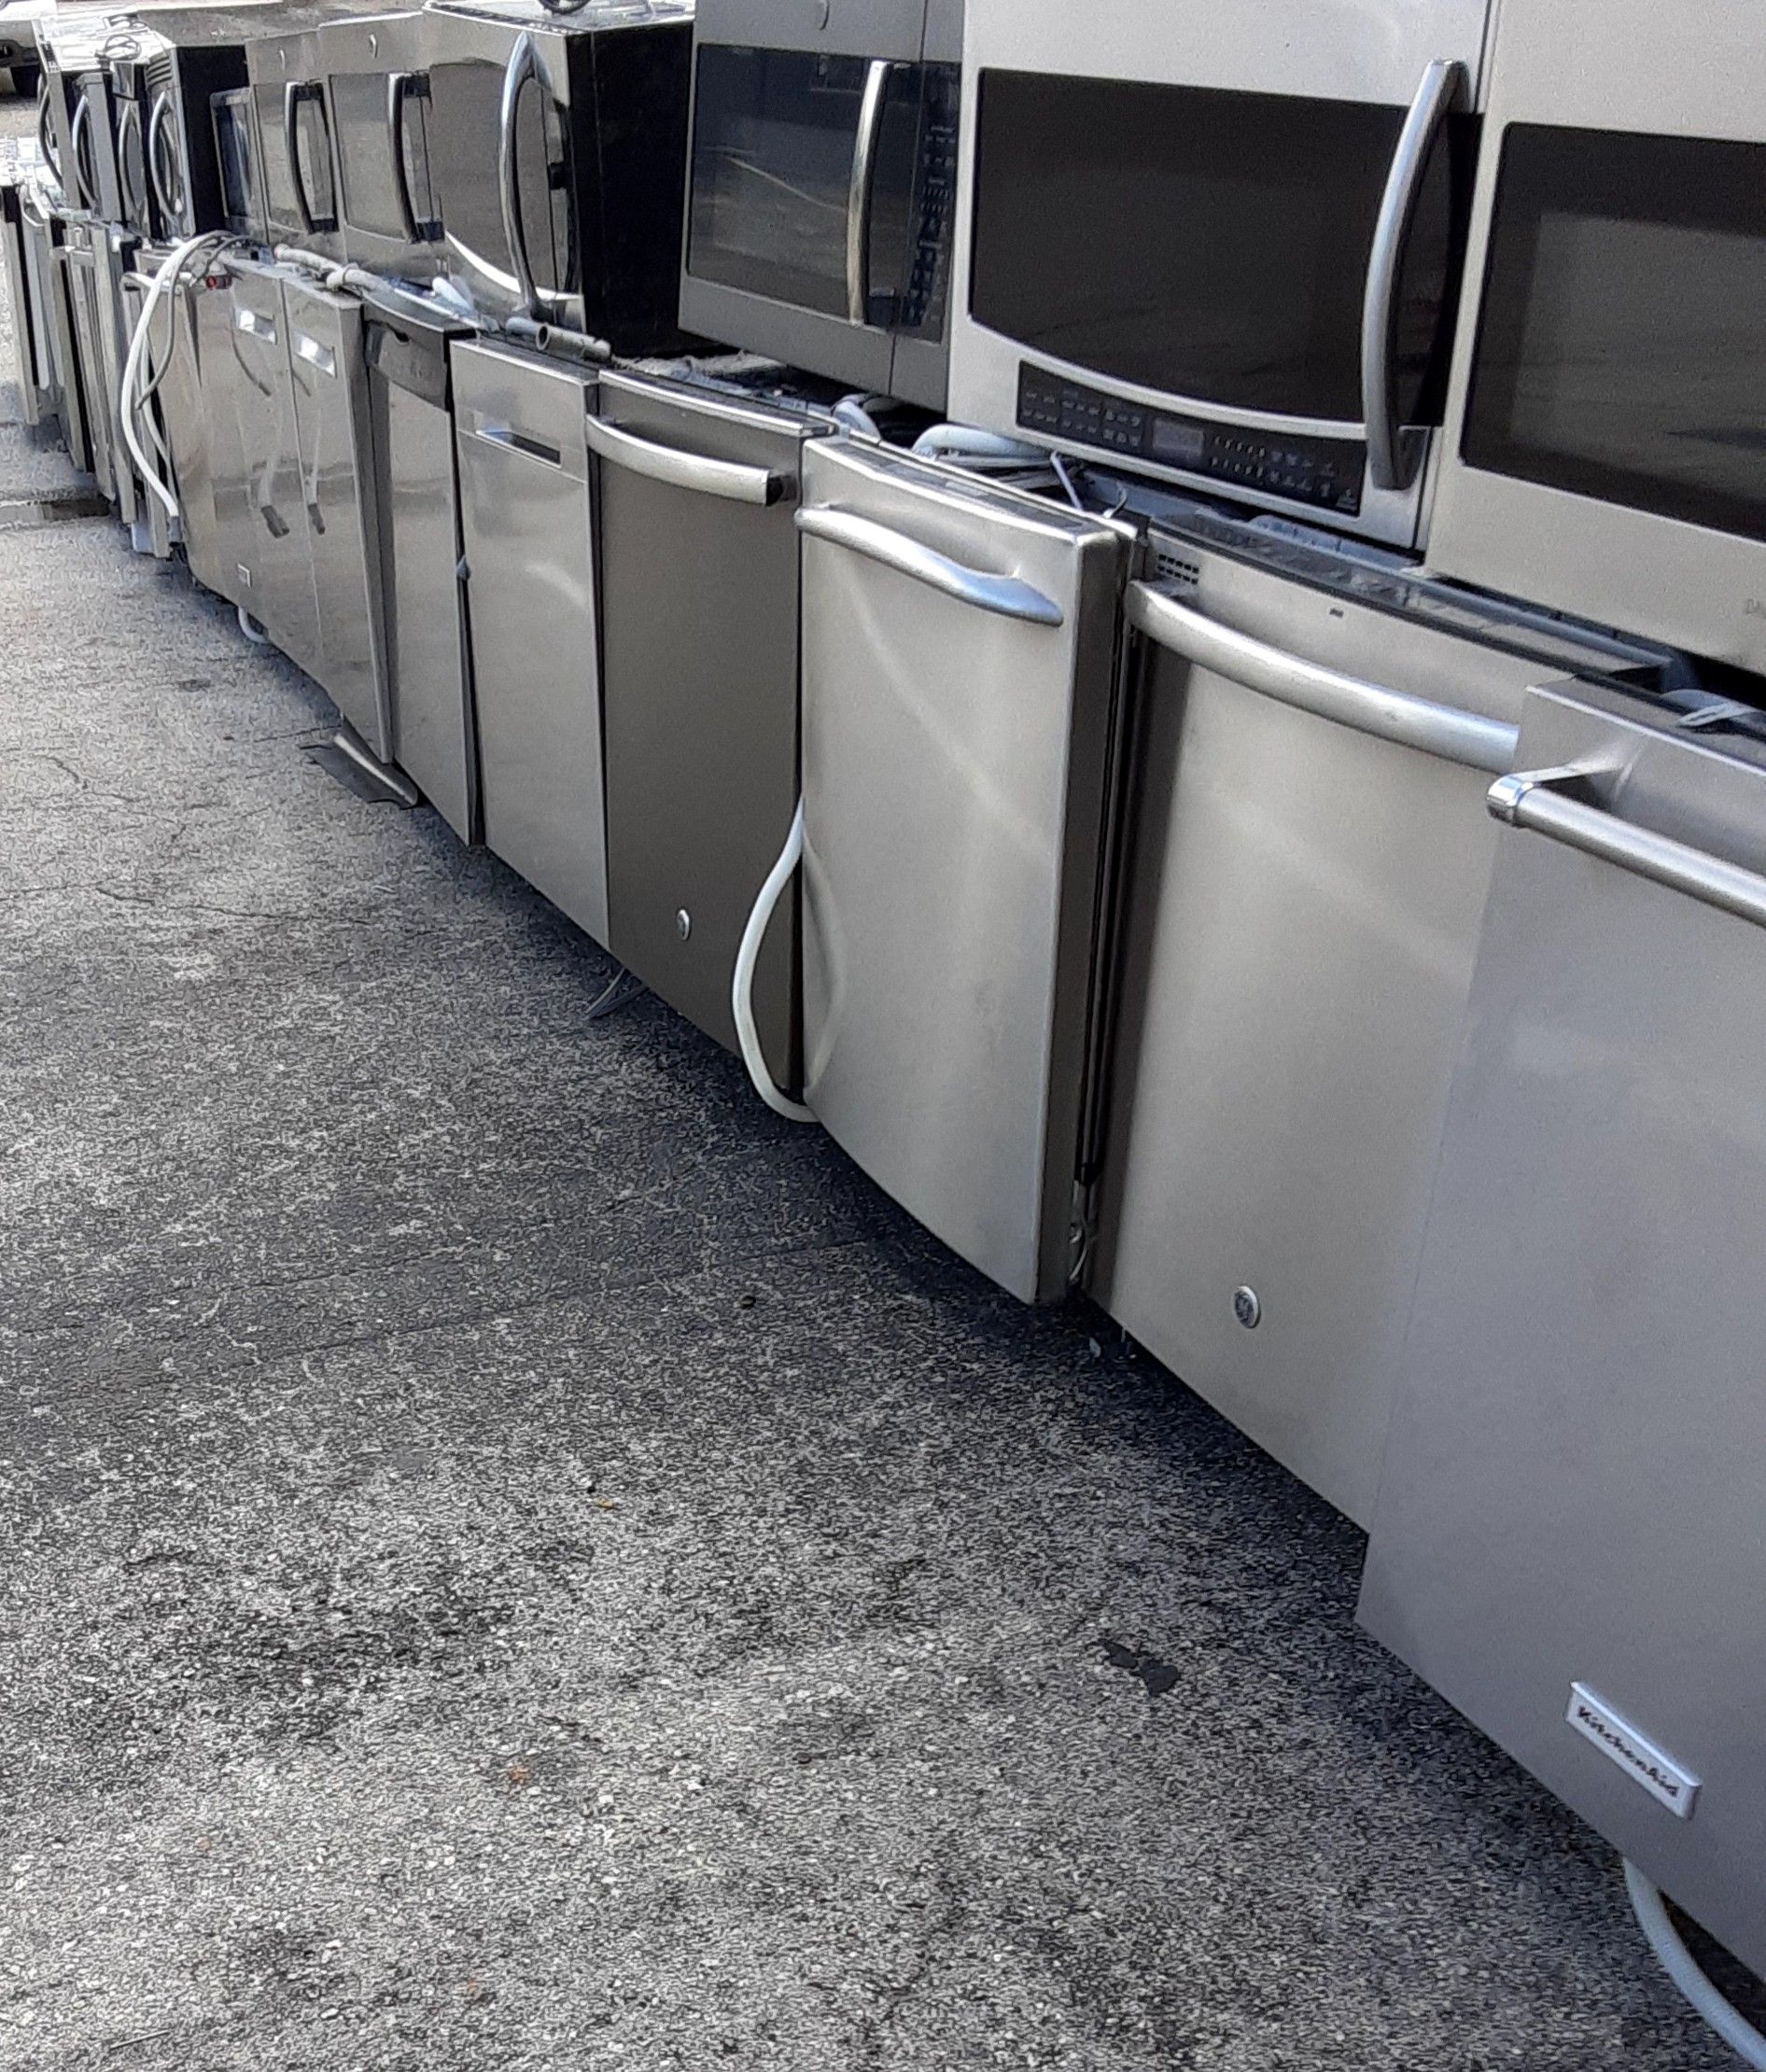 BEAUTIFUL STAINLESS STEEL DISHWASHERS AND MICROWAVES 100 AND UP